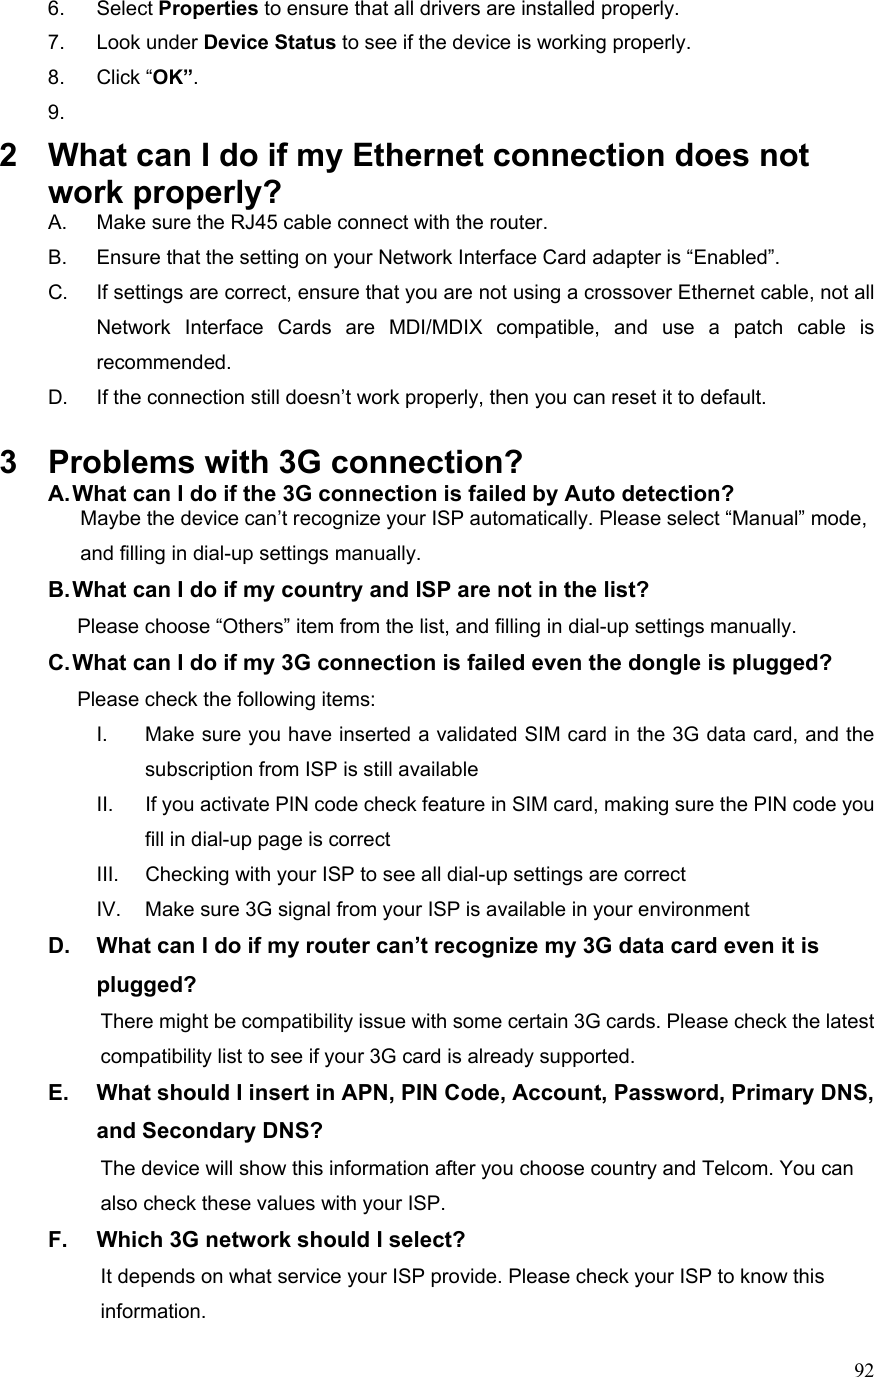  926. Select Properties to ensure that all drivers are installed properly. 7. Look under Device Status to see if the device is working properly. 8. Click “OK”. 9.  2  What can I do if my Ethernet connection does not work properly? A.  Make sure the RJ45 cable connect with the router. B.  Ensure that the setting on your Network Interface Card adapter is “Enabled”. C.  If settings are correct, ensure that you are not using a crossover Ethernet cable, not all Network Interface Cards are MDI/MDIX compatible, and use a patch cable is recommended. D.  If the connection still doesn’t work properly, then you can reset it to default.      3  Problems with 3G connection? A. What can I do if the 3G connection is failed by Auto detection?           Maybe the device can’t recognize your ISP automatically. Please select “Manual” mode,     and filling in dial-up settings manually. B. What can I do if my country and ISP are not in the list?        Please choose “Others” item from the list, and filling in dial-up settings manually. C. What can I do if my 3G connection is failed even the dongle is plugged?        Please check the following items: I.  Make sure you have inserted a validated SIM card in the 3G data card, and the subscription from ISP is still available II.  If you activate PIN code check feature in SIM card, making sure the PIN code you fill in dial-up page is correct III.  Checking with your ISP to see all dial-up settings are correct IV.  Make sure 3G signal from your ISP is available in your environment D.  What can I do if my router can’t recognize my 3G data card even it is plugged?           There might be compatibility issue with some certain 3G cards. Please check the latest     compatibility list to see if your 3G card is already supported. E.  What should I insert in APN, PIN Code, Account, Password, Primary DNS, and Secondary DNS?                     The device will show this information after you choose country and Telcom. You can       also check these values with your ISP. F.  Which 3G network should I select?                     It depends on what service your ISP provide. Please check your ISP to know this information. 